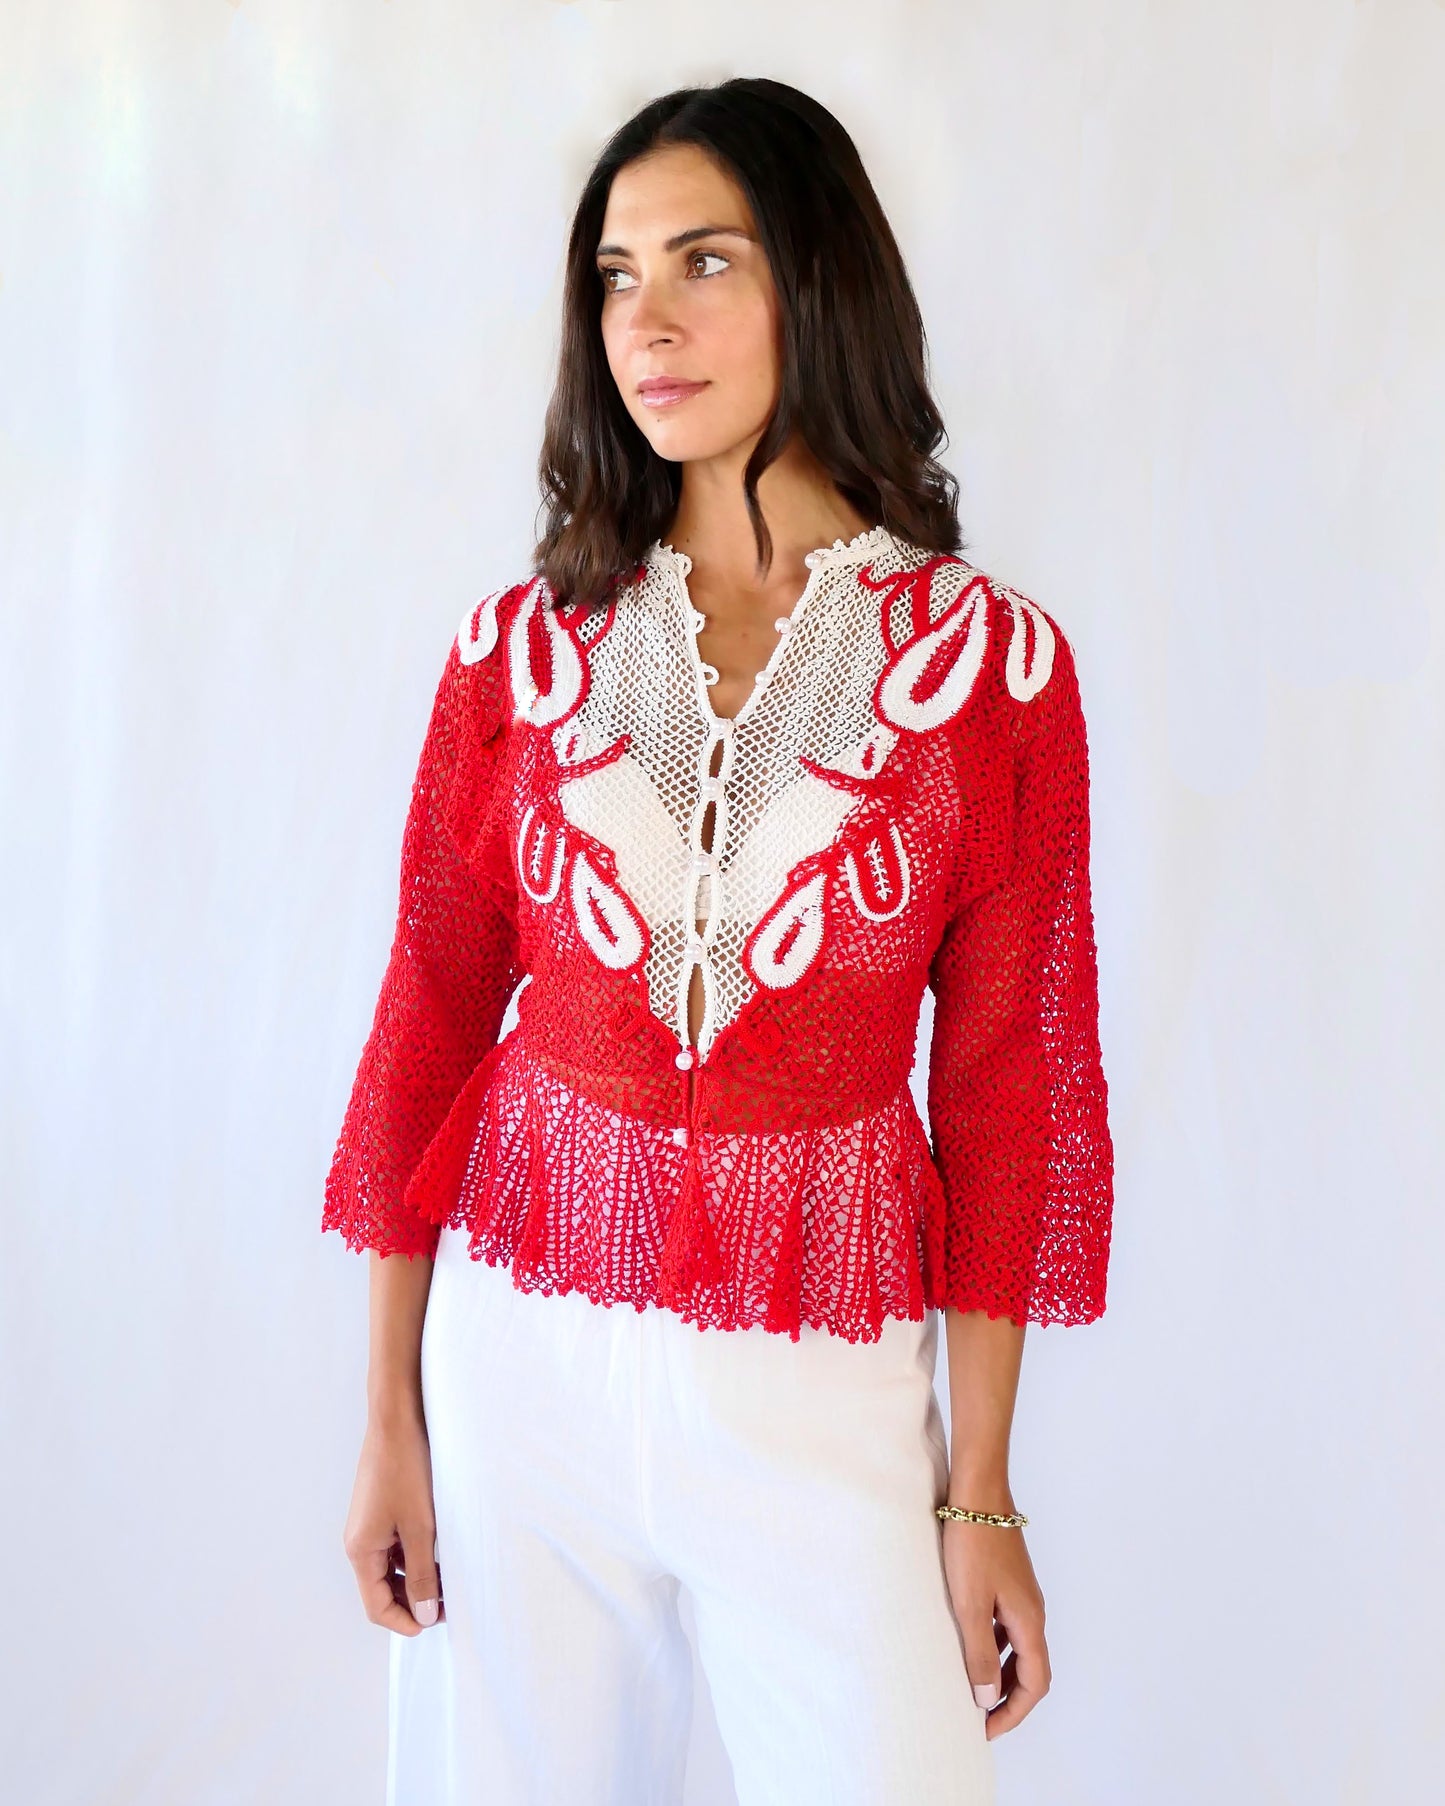 Red and White Hand Crocheted Festive Top with Faux Pearl Buttons